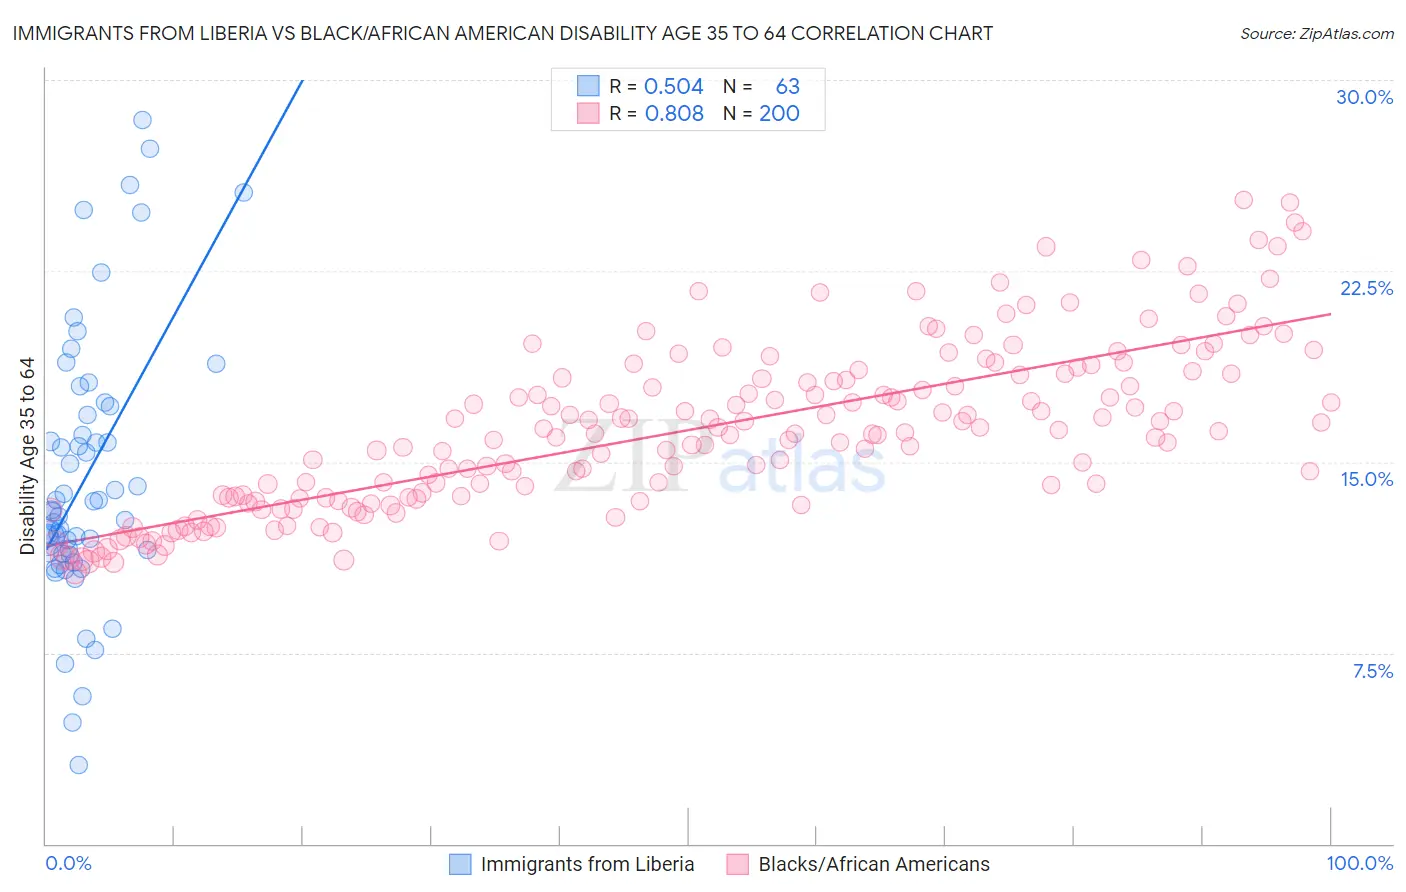 Immigrants from Liberia vs Black/African American Disability Age 35 to 64